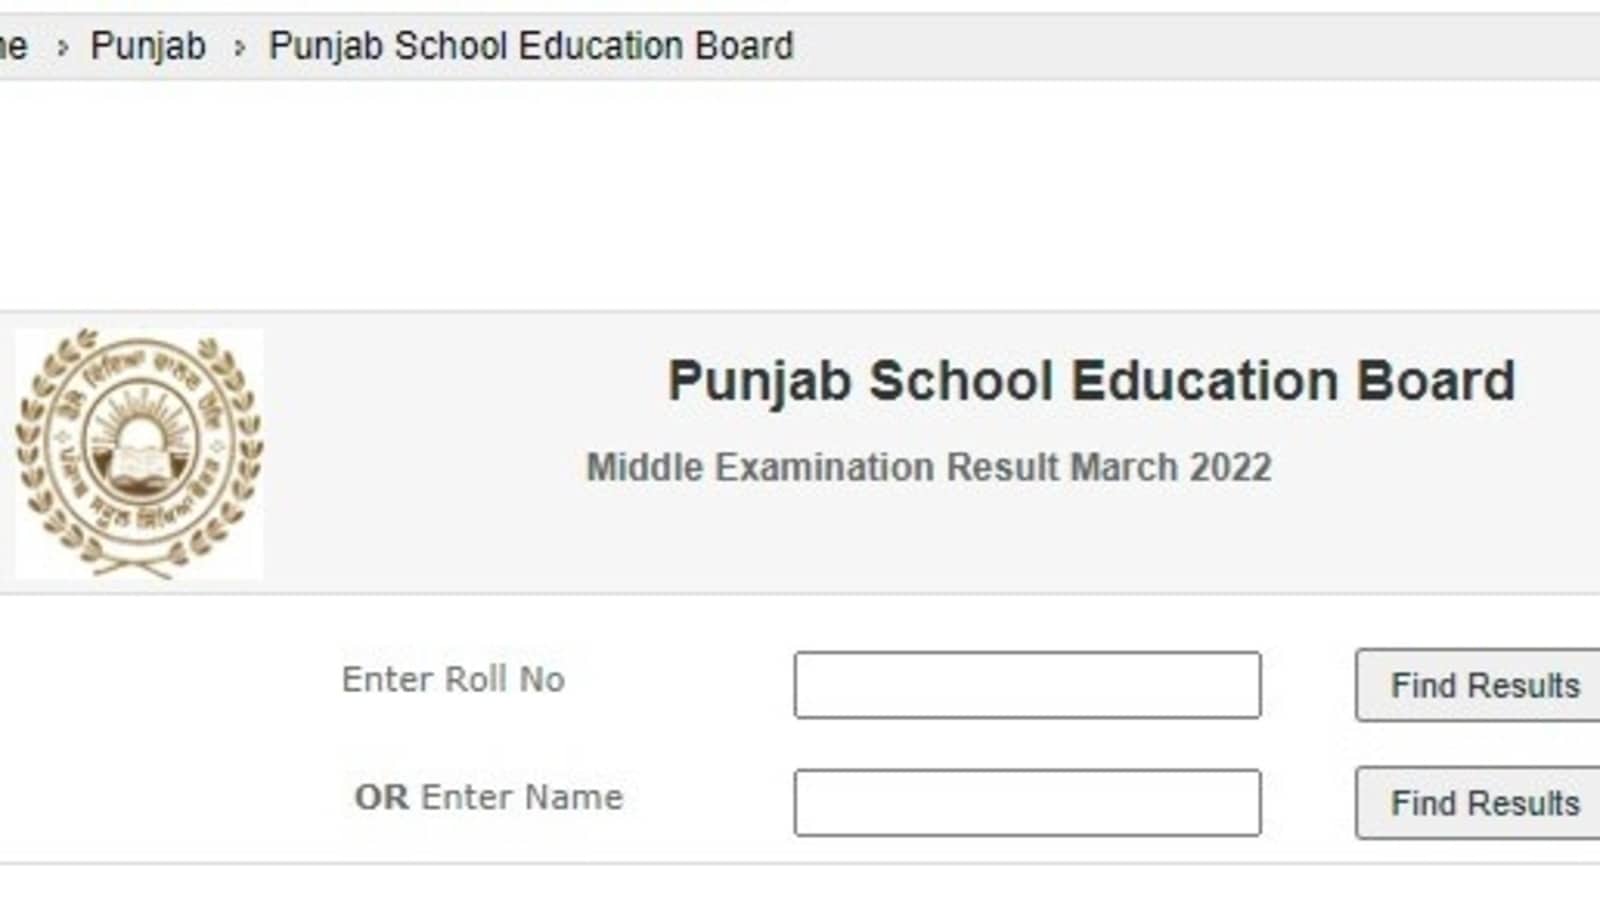 PSEB 10th Result 2022: Punjab Board Class 10 Results Expected to